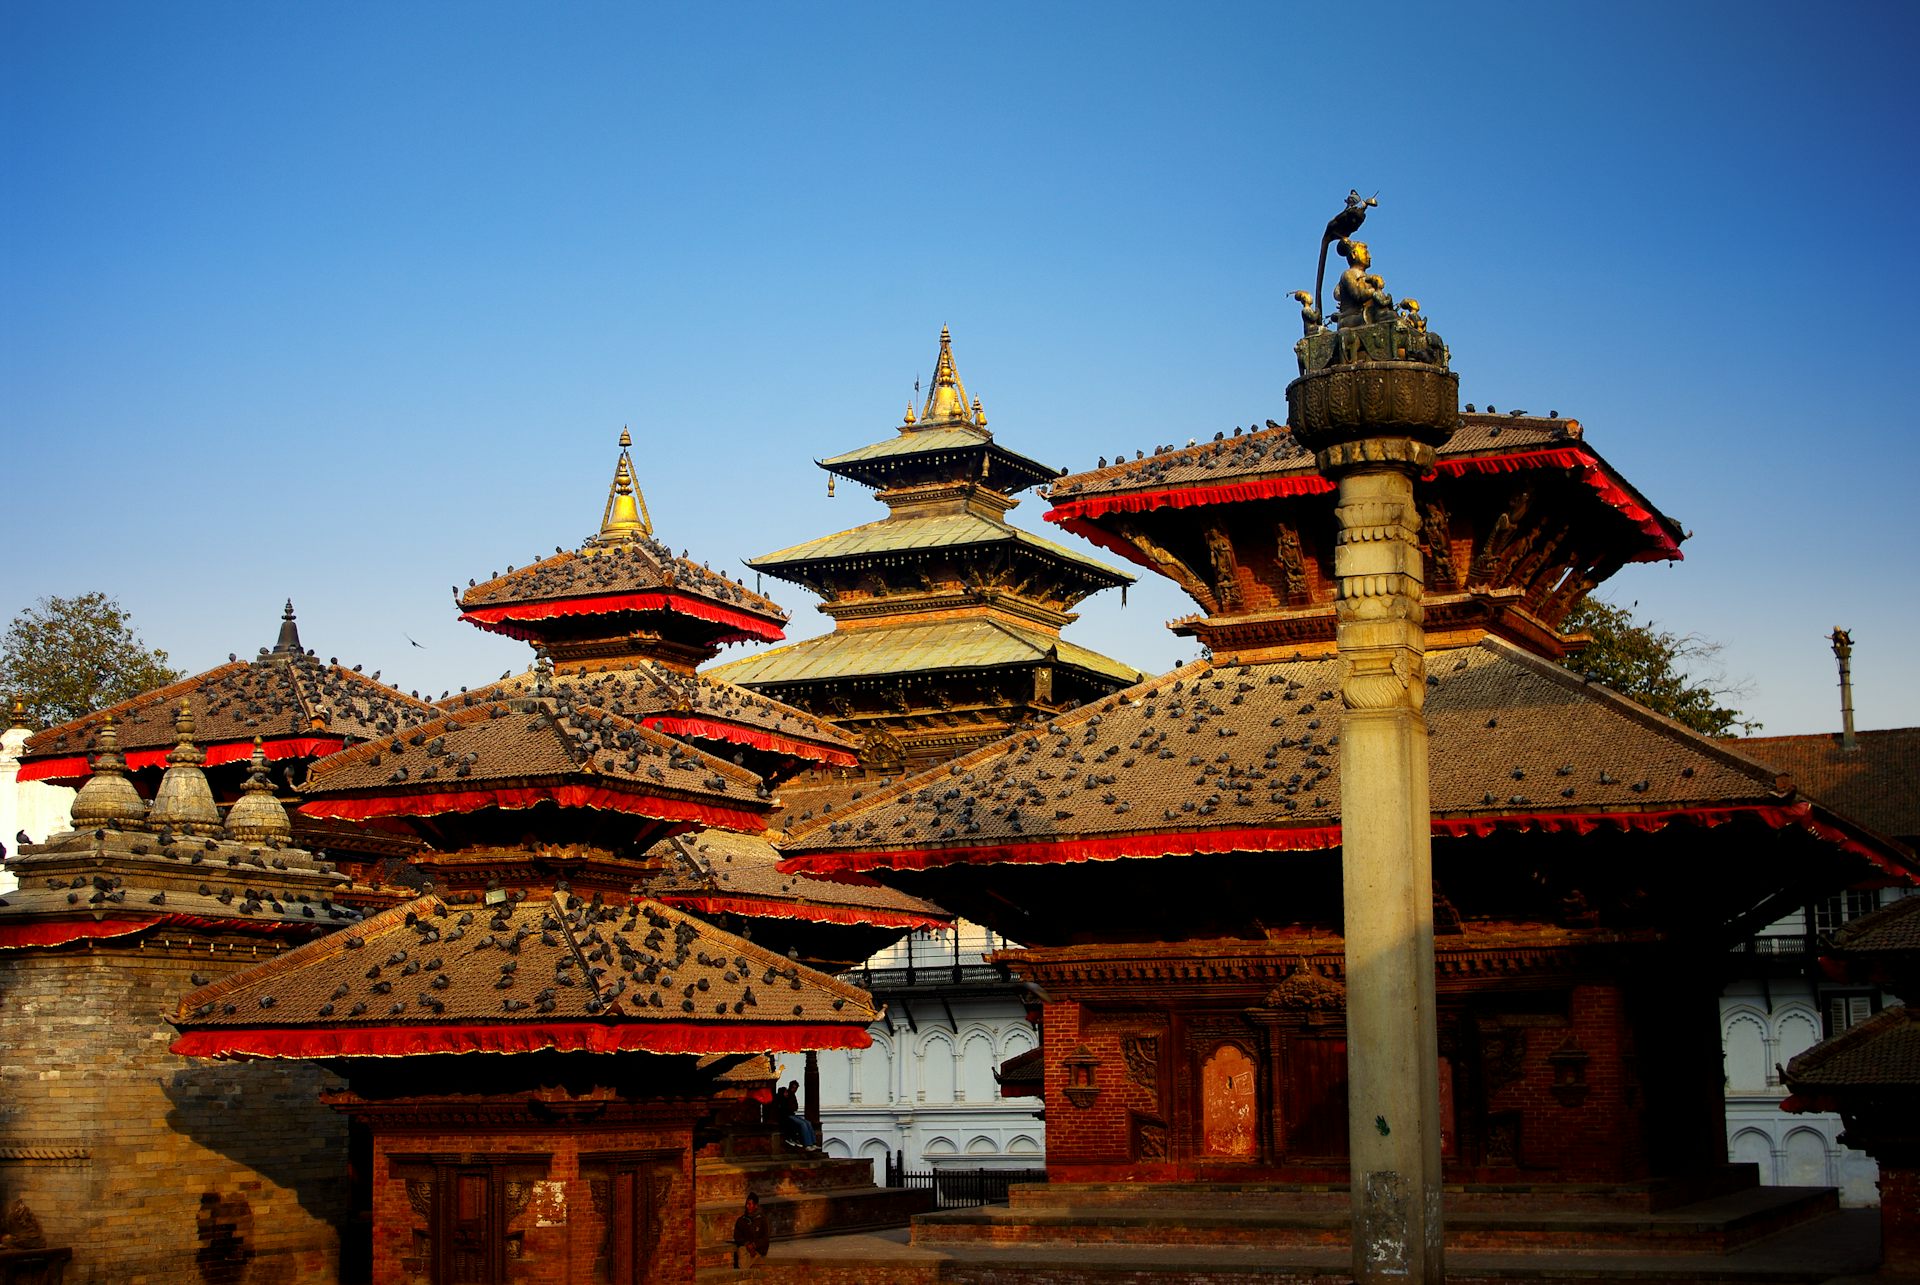 The history of Kathmandu Valley, as told by its architecture